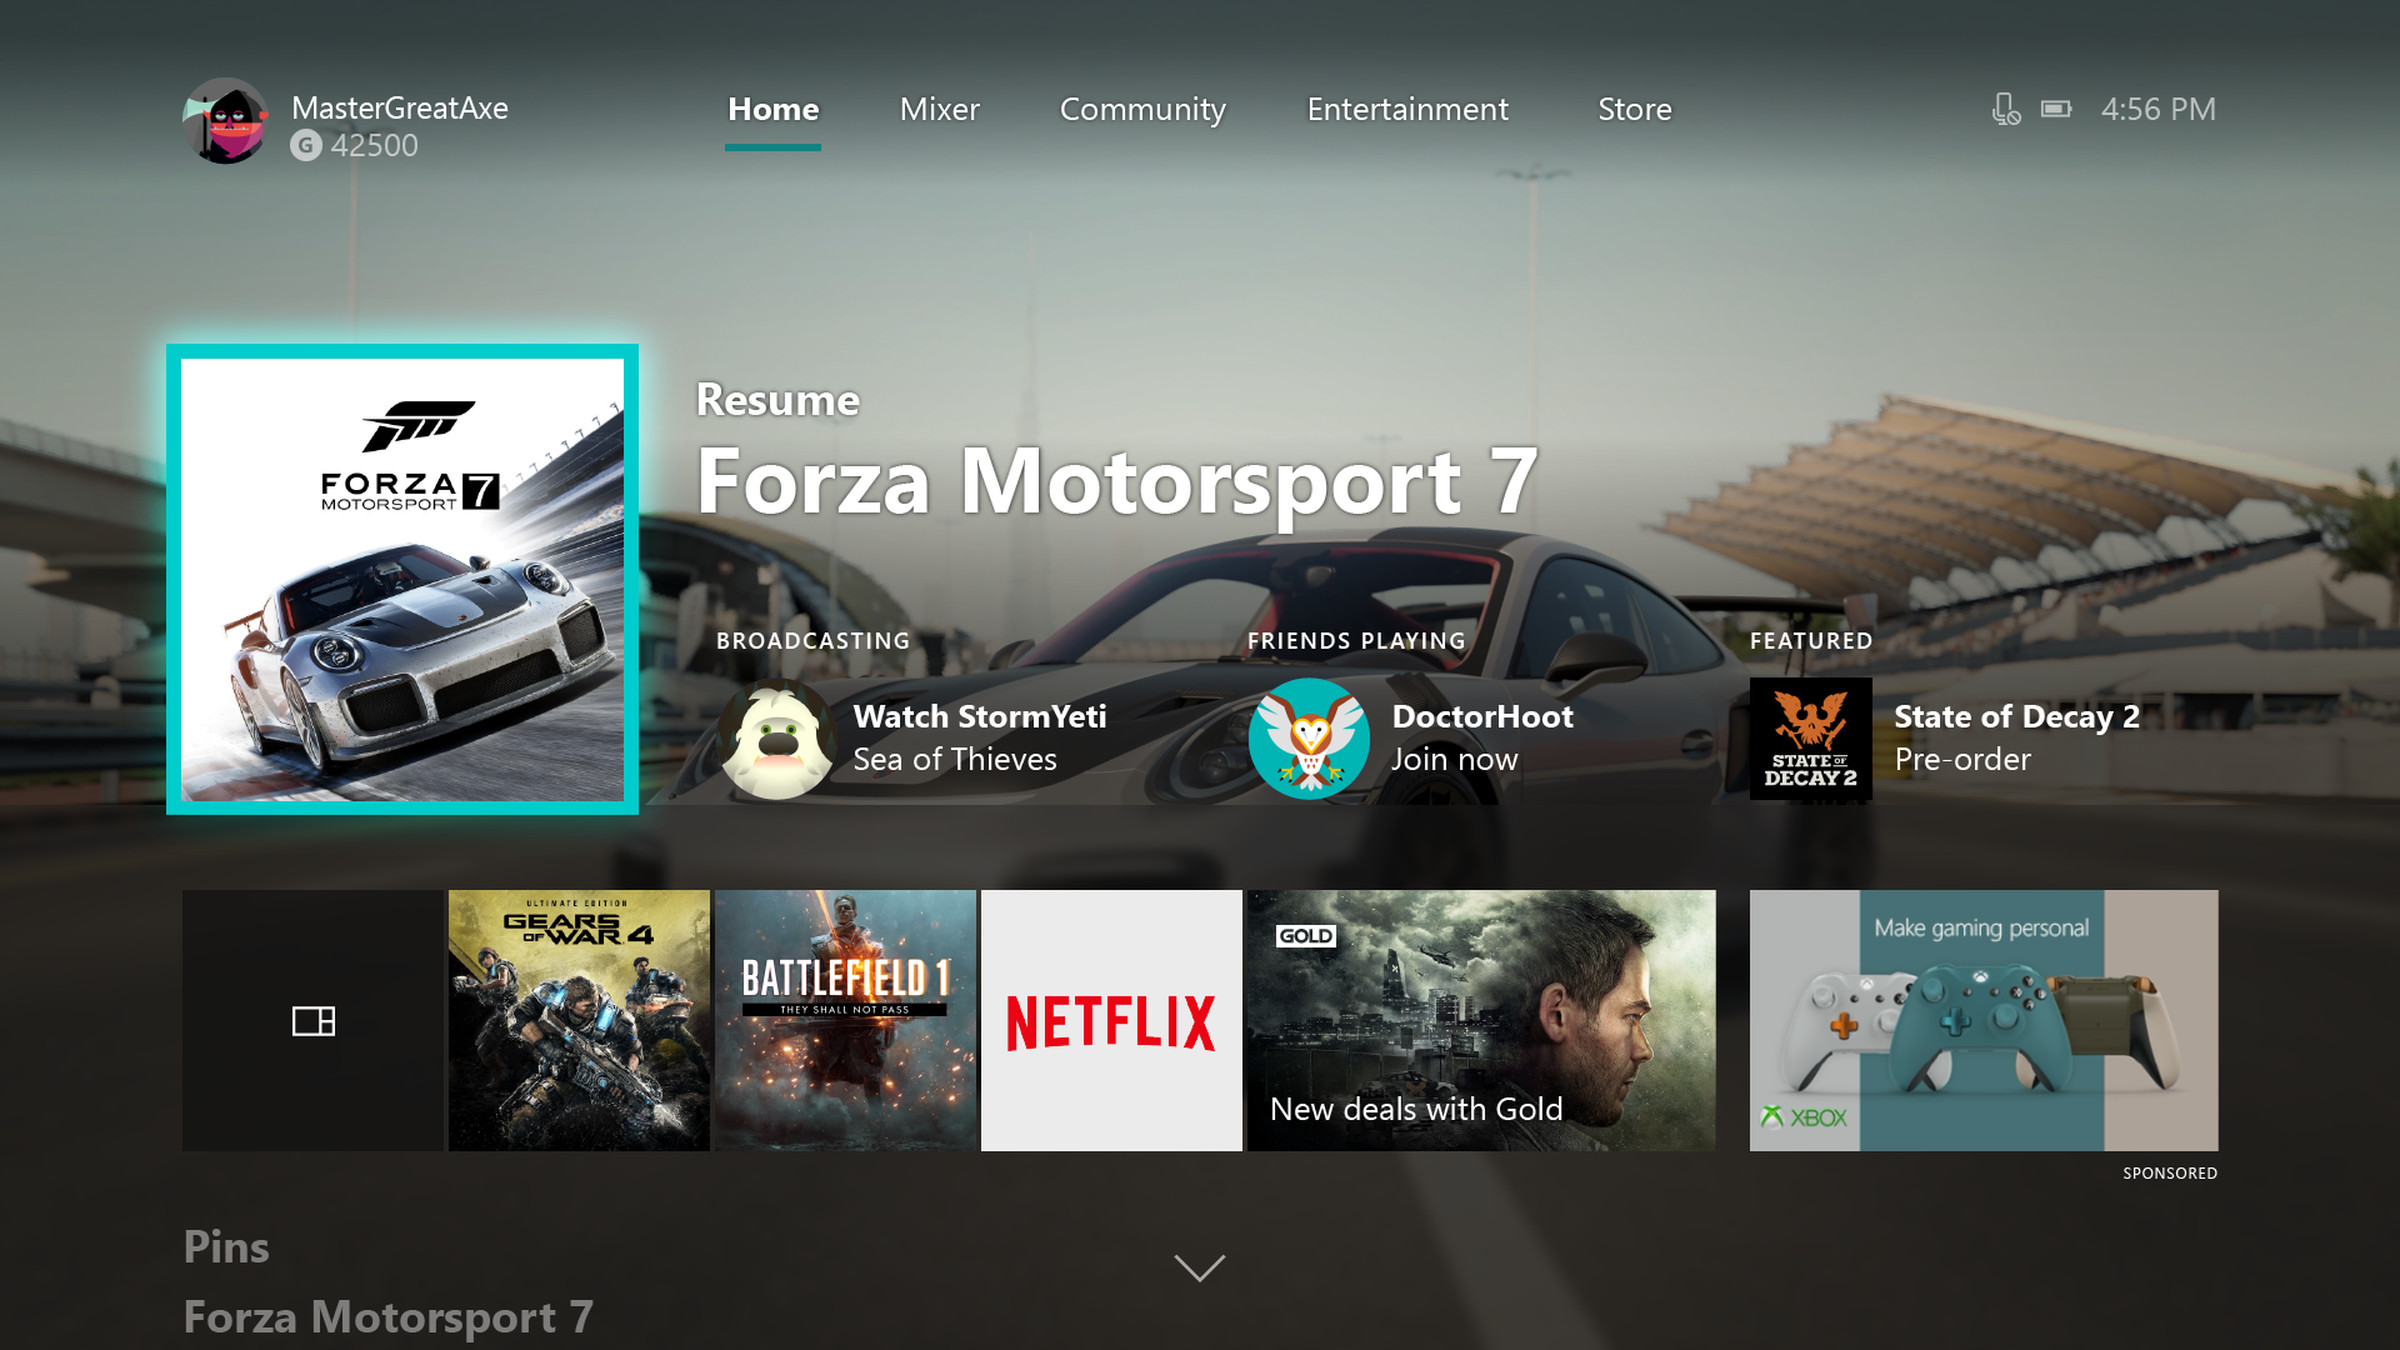 The new Xbox One dashboard will include customization options throughout, including a row of pinned items users can select. 